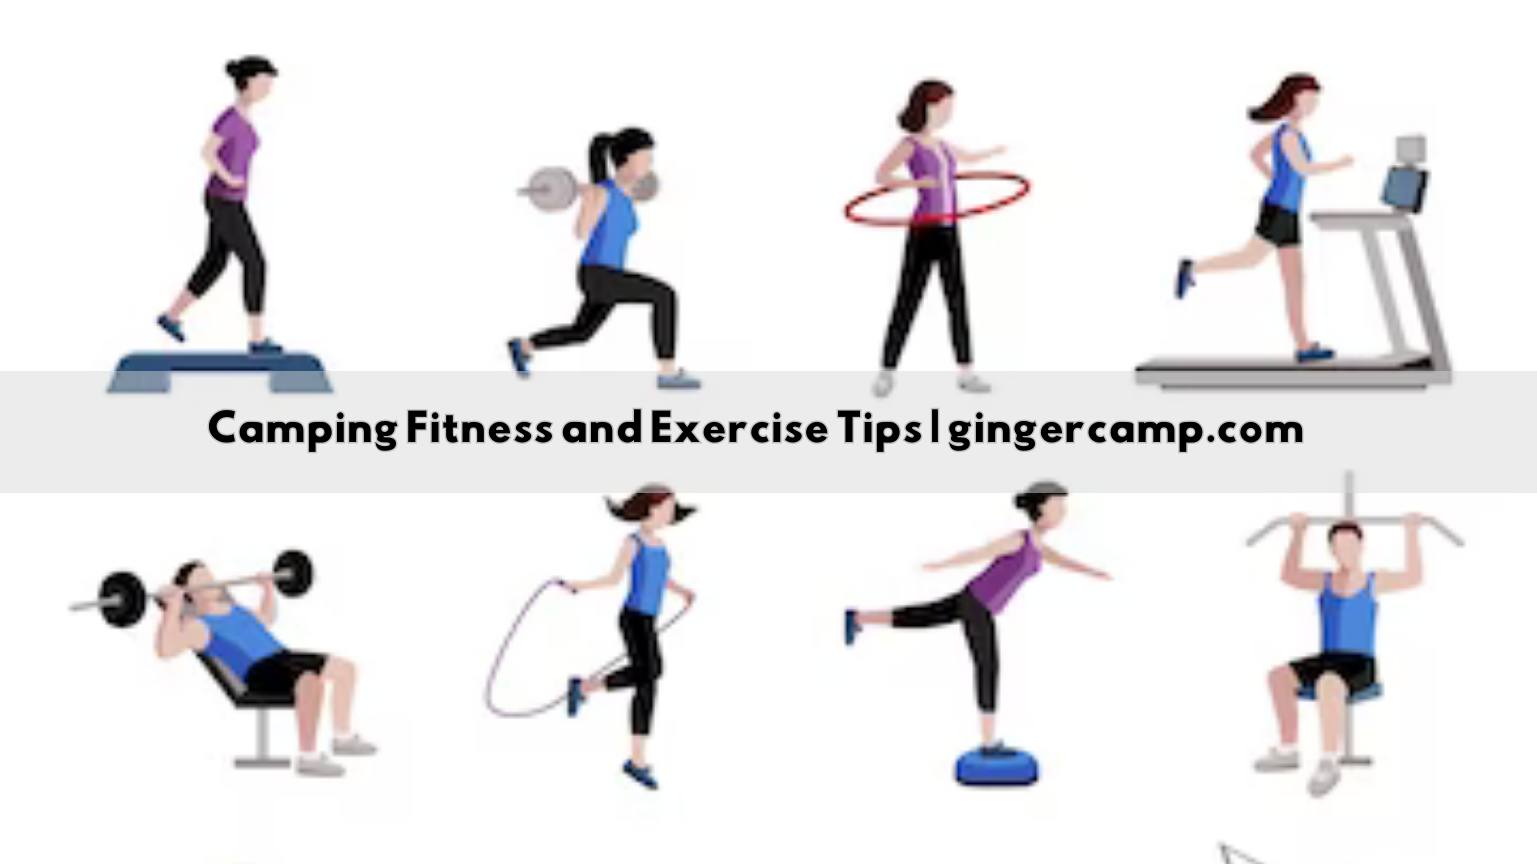 Camping Fitness and Exercise Tips